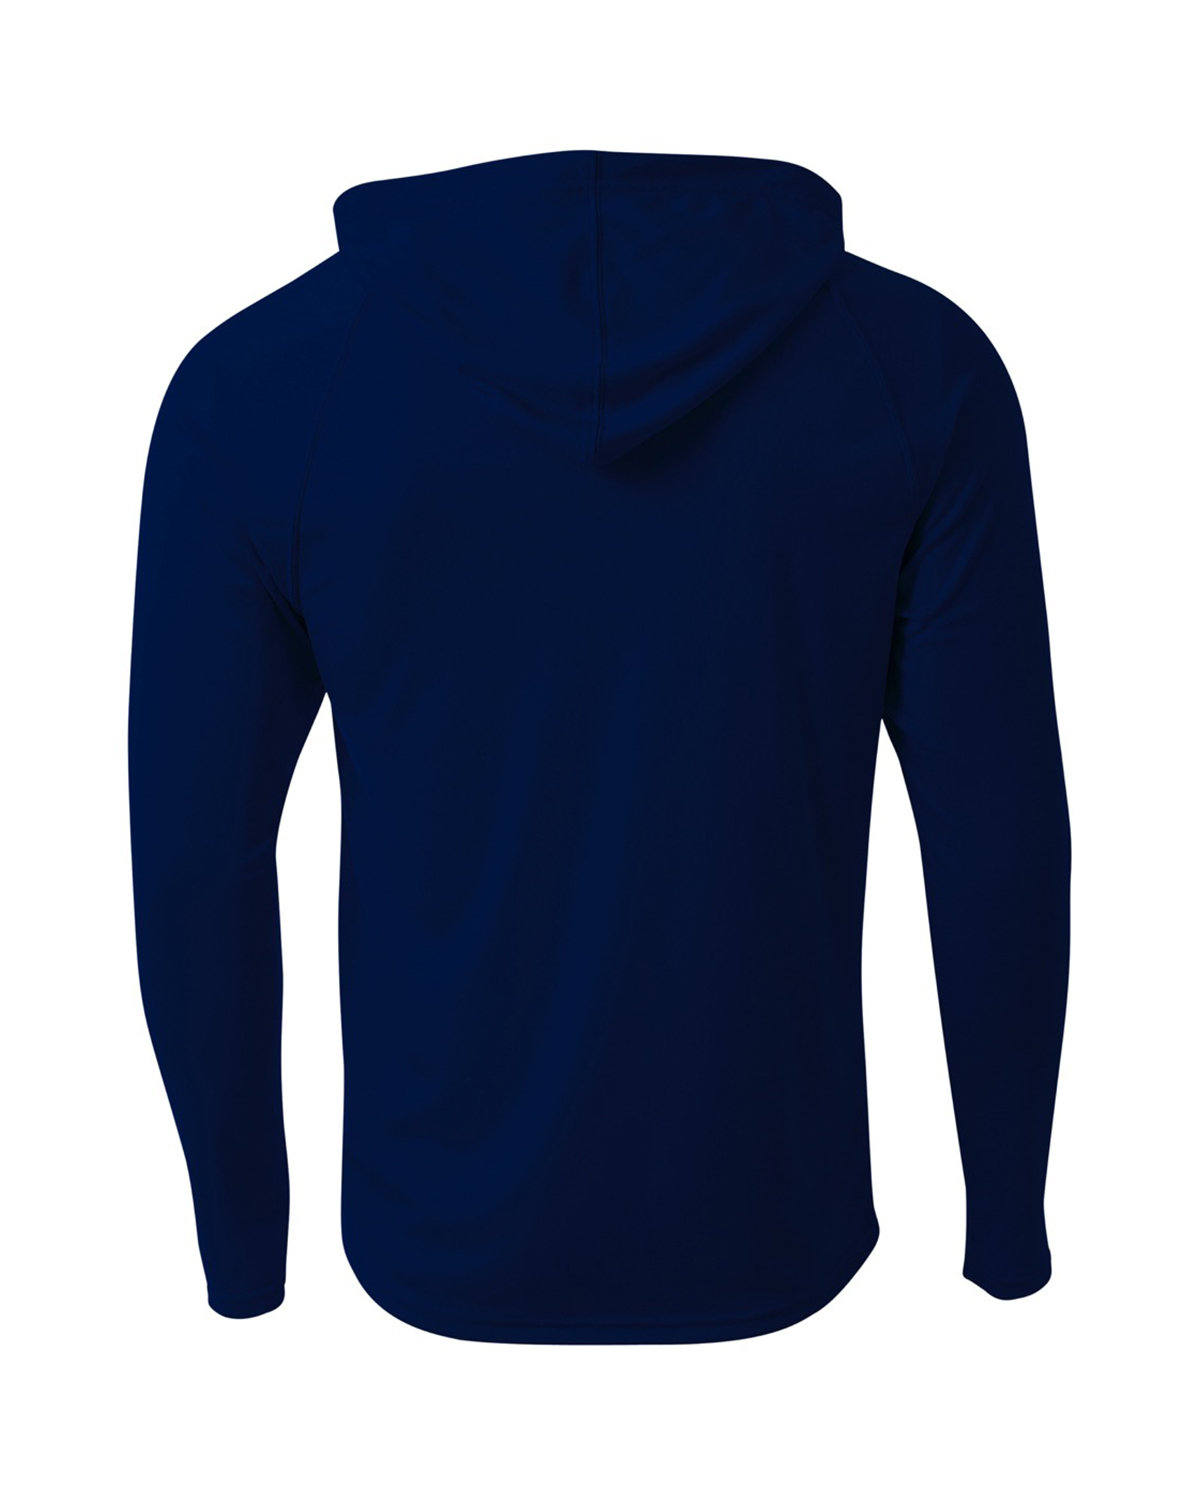 A4 Men's Cooling Performance Long-Sleeve Hooded T-shirt | US Generic ...